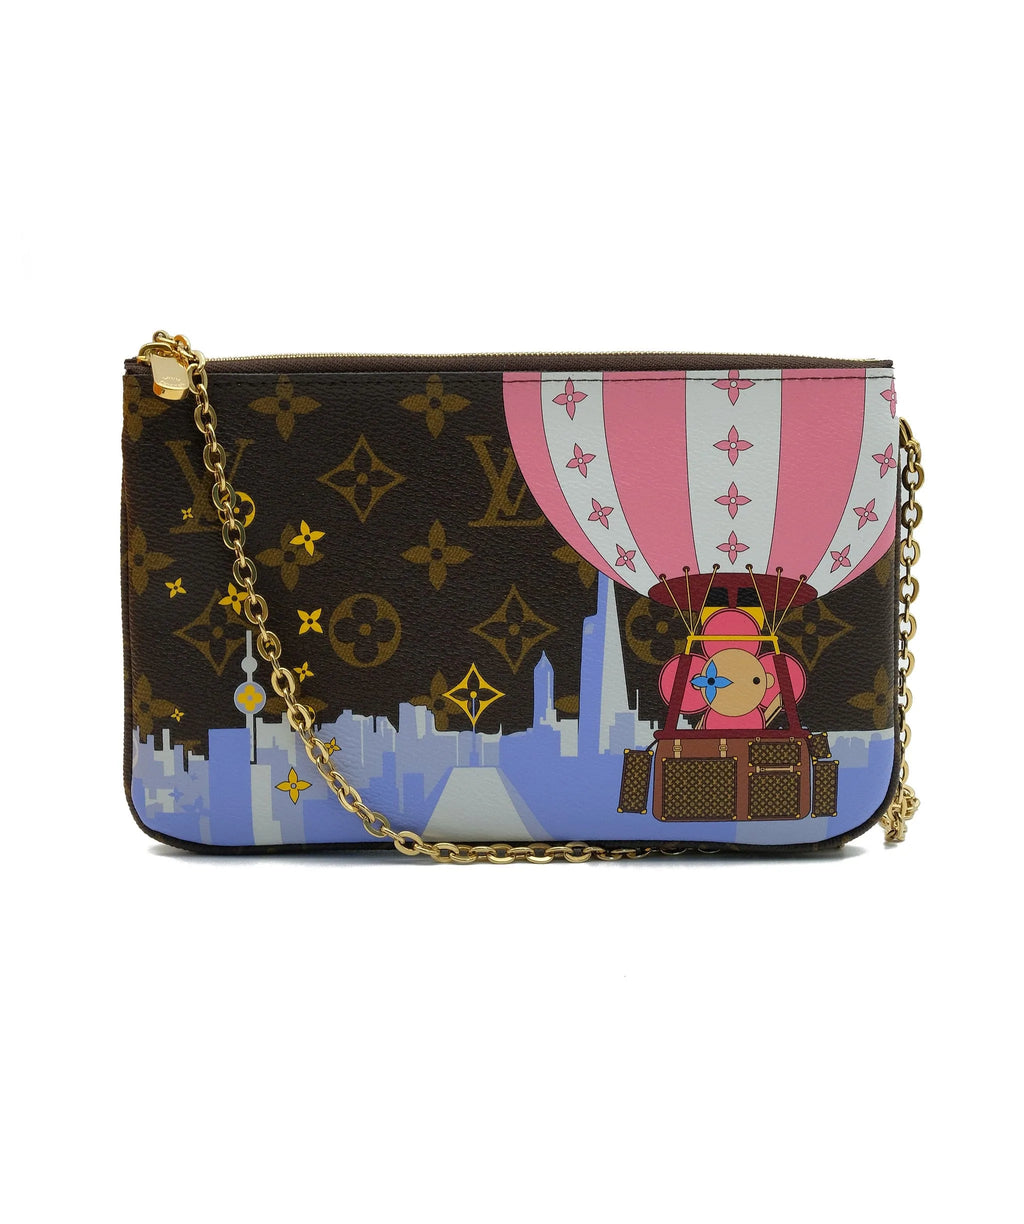 Louis Vuitton Limited Edition Christmas Shanghai Crossbody Bag  Louis  vuitton limited edition, Louis vuitton crossbody bag, Bags